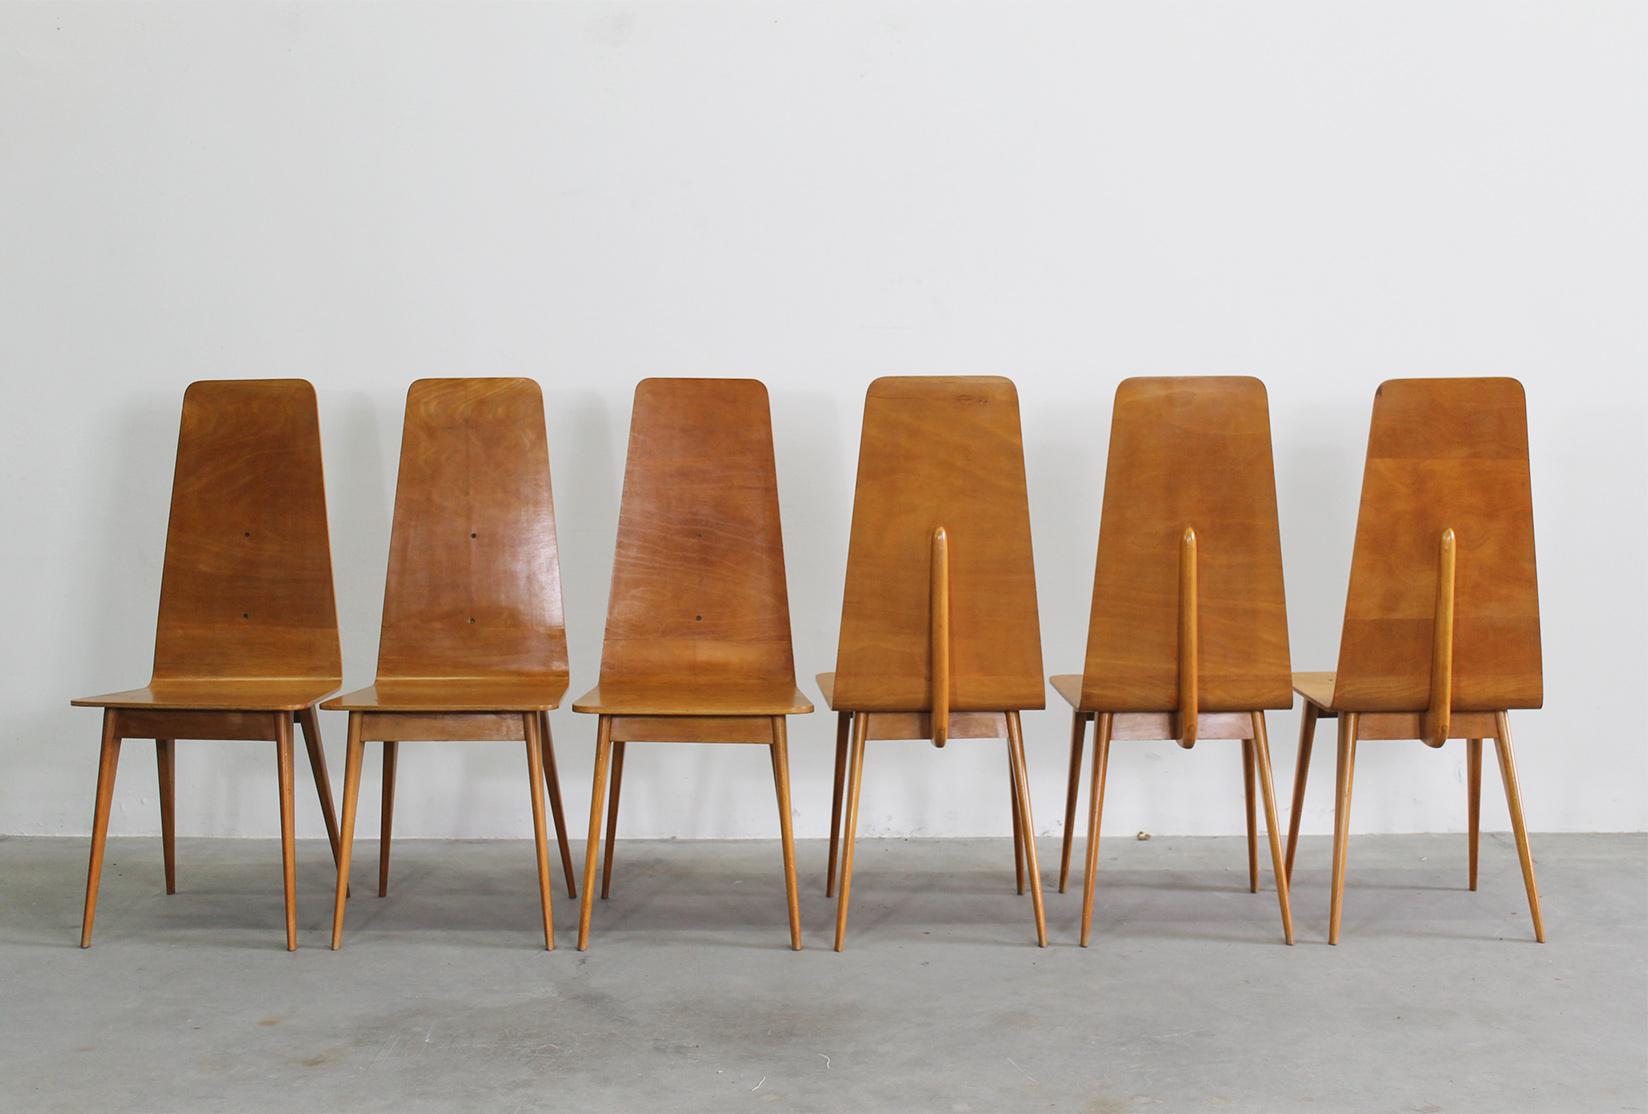 Set of Six Dining Chairs in Wood by Sineo Gemignani Italian Manufacture 1940s In Good Condition For Sale In Montecatini Terme, IT